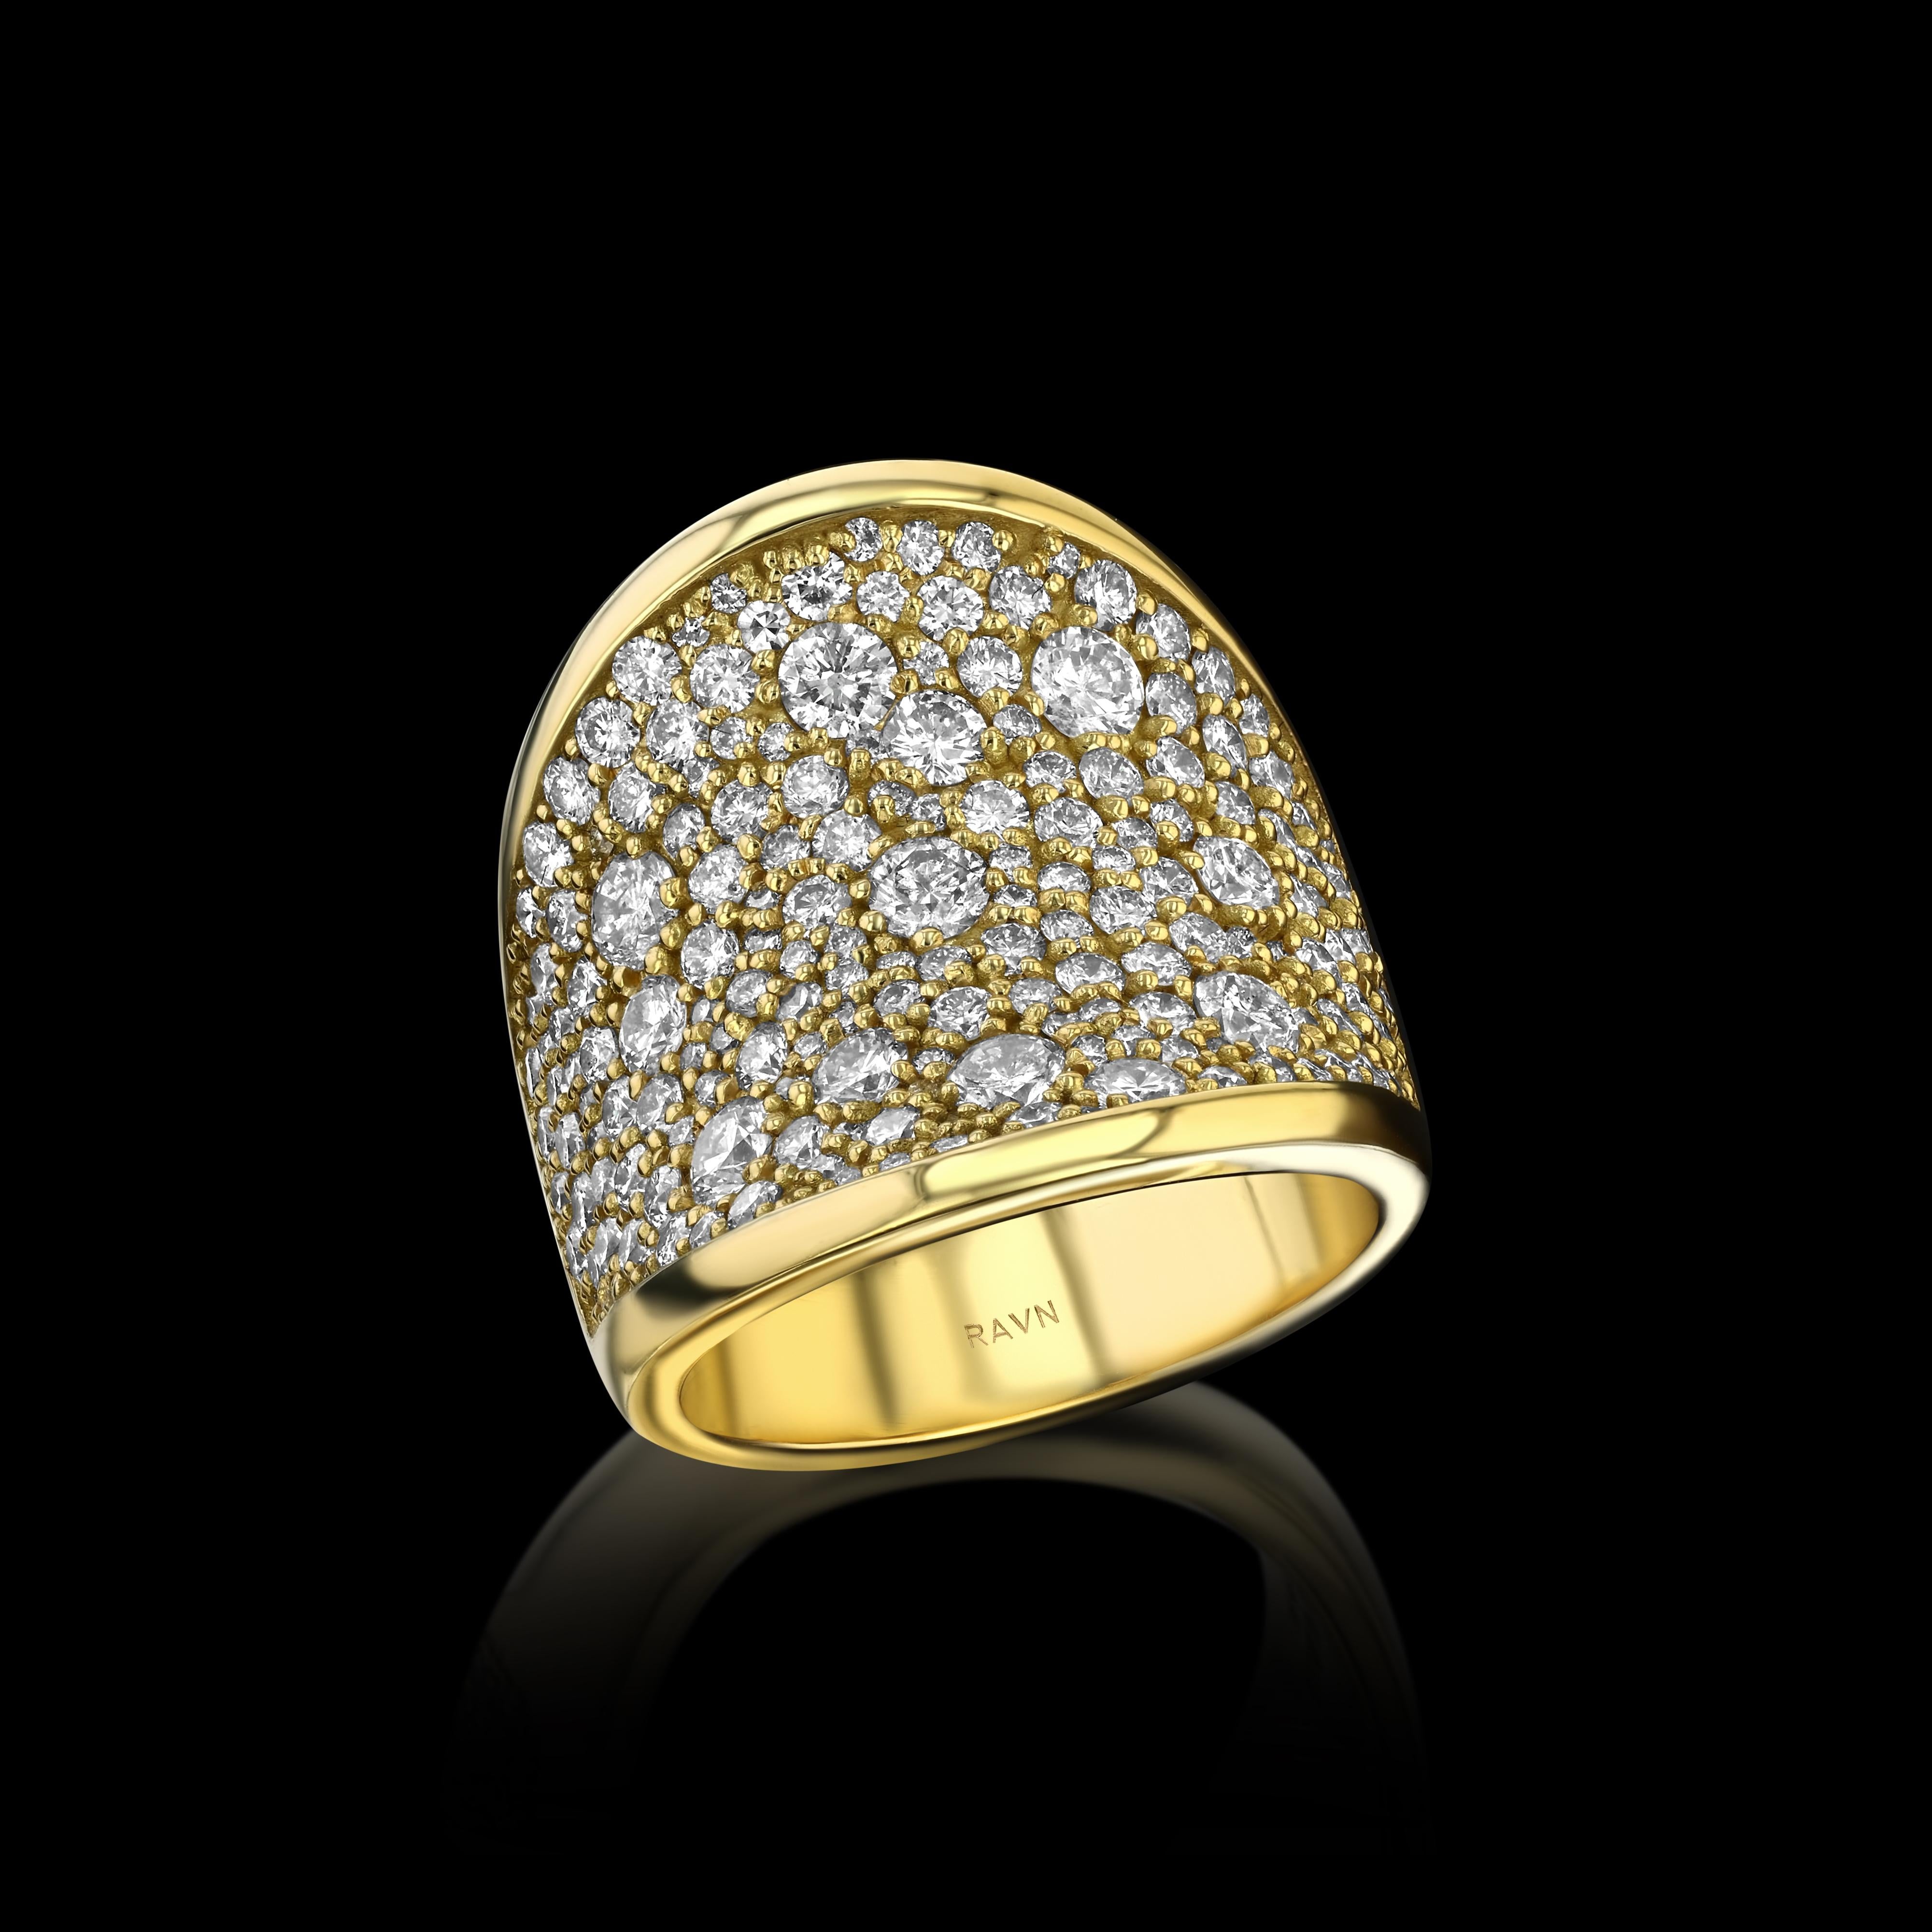 18k yellow gold Saddle ring from the House of RAVN Equine Collection.   

Featuring 180 assorted size round cut diamonds expertly set in a mosaic pattern (3.65ct total).

21.5mm wide.


The Equine Collection, by House of RAVN: a fusion of designer